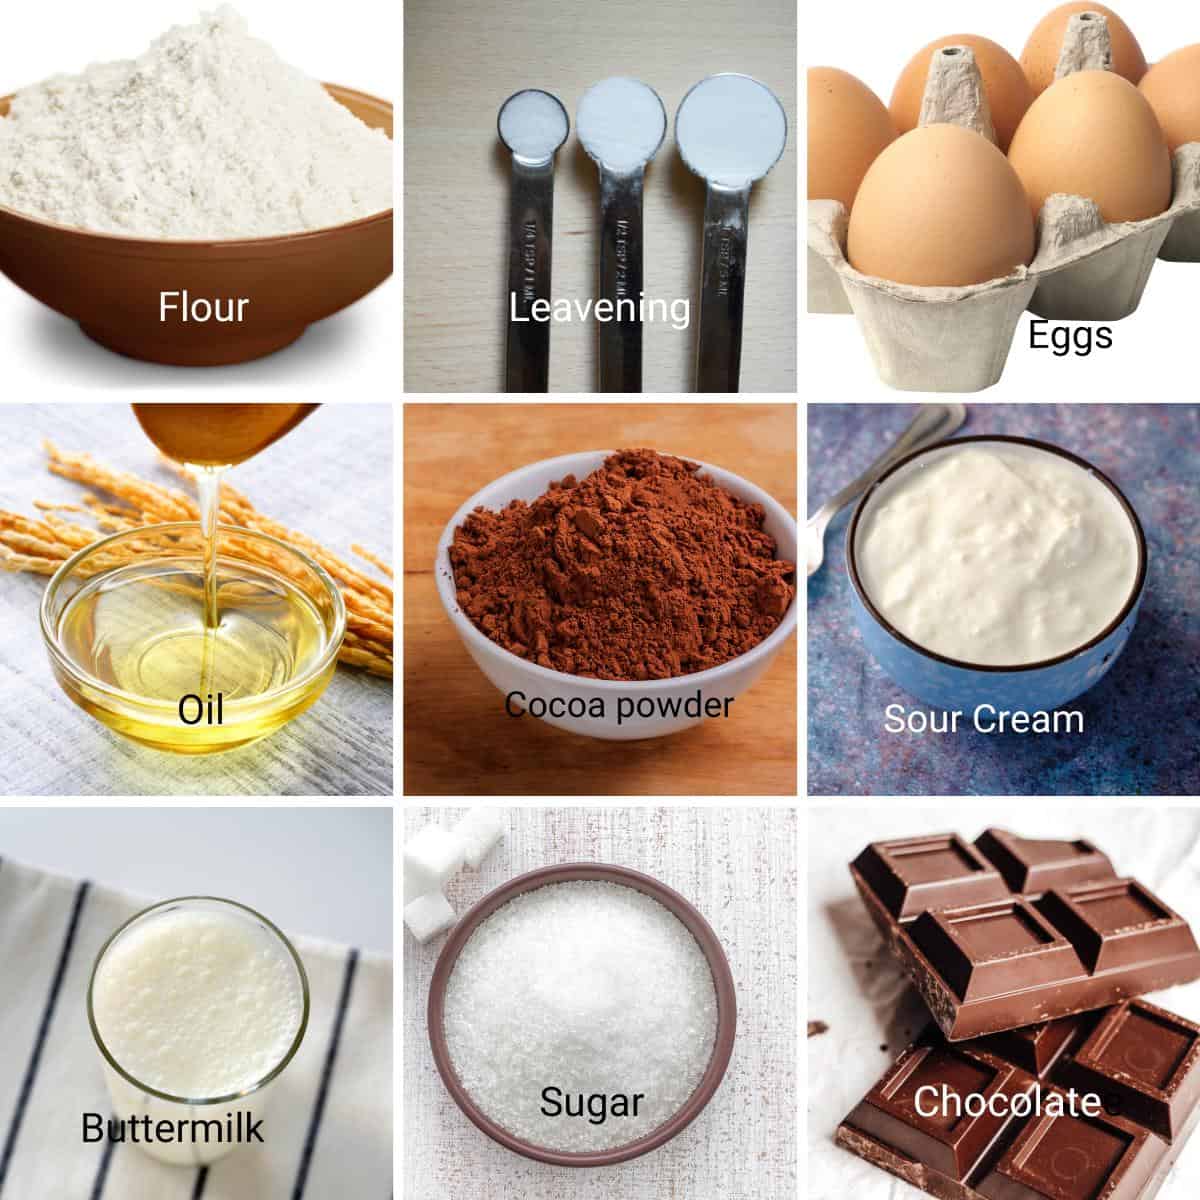 Ingredients for making chocolate birthday cake.